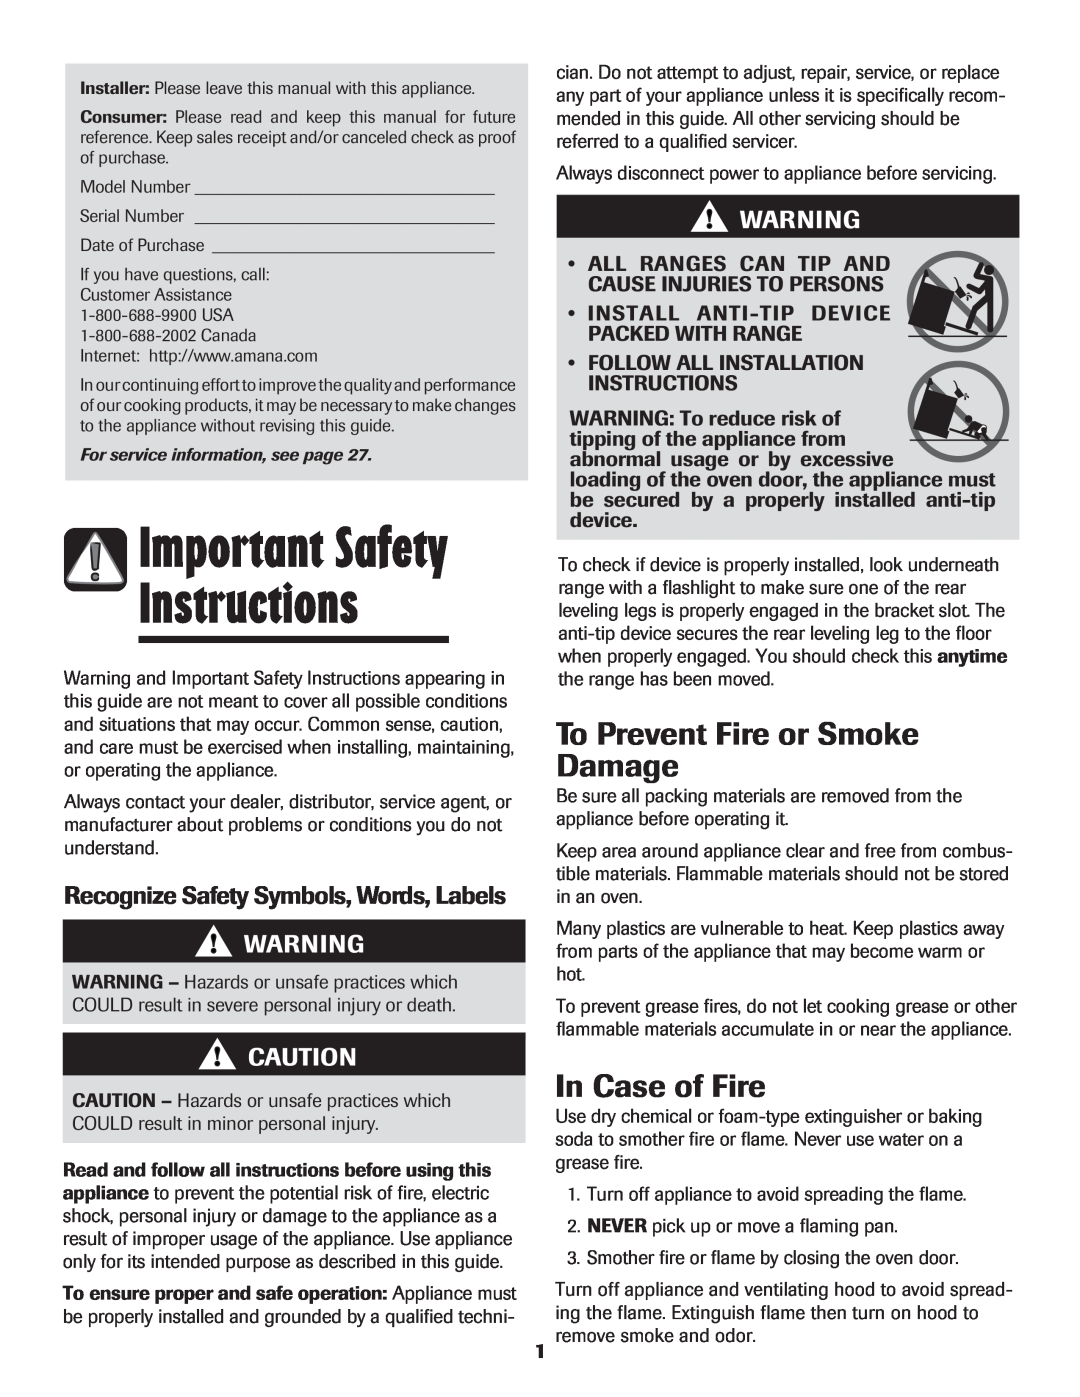 Amana AER5845RAW warranty Instructions, Important Safety, To Prevent Fire or Smoke Damage, In Case of Fire 